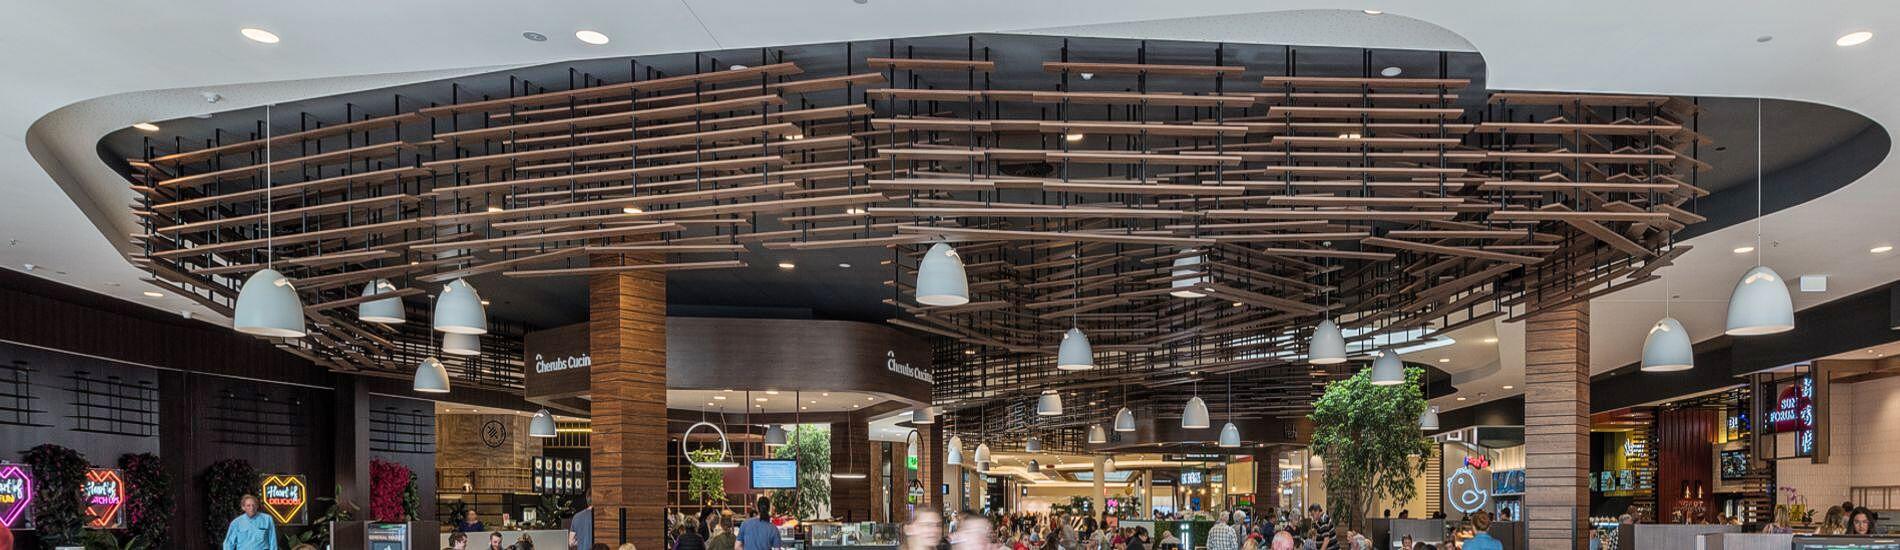 Customised SUPASLAT Creates Complex Suspended Slatted Ceiling Feature in Foodcourt